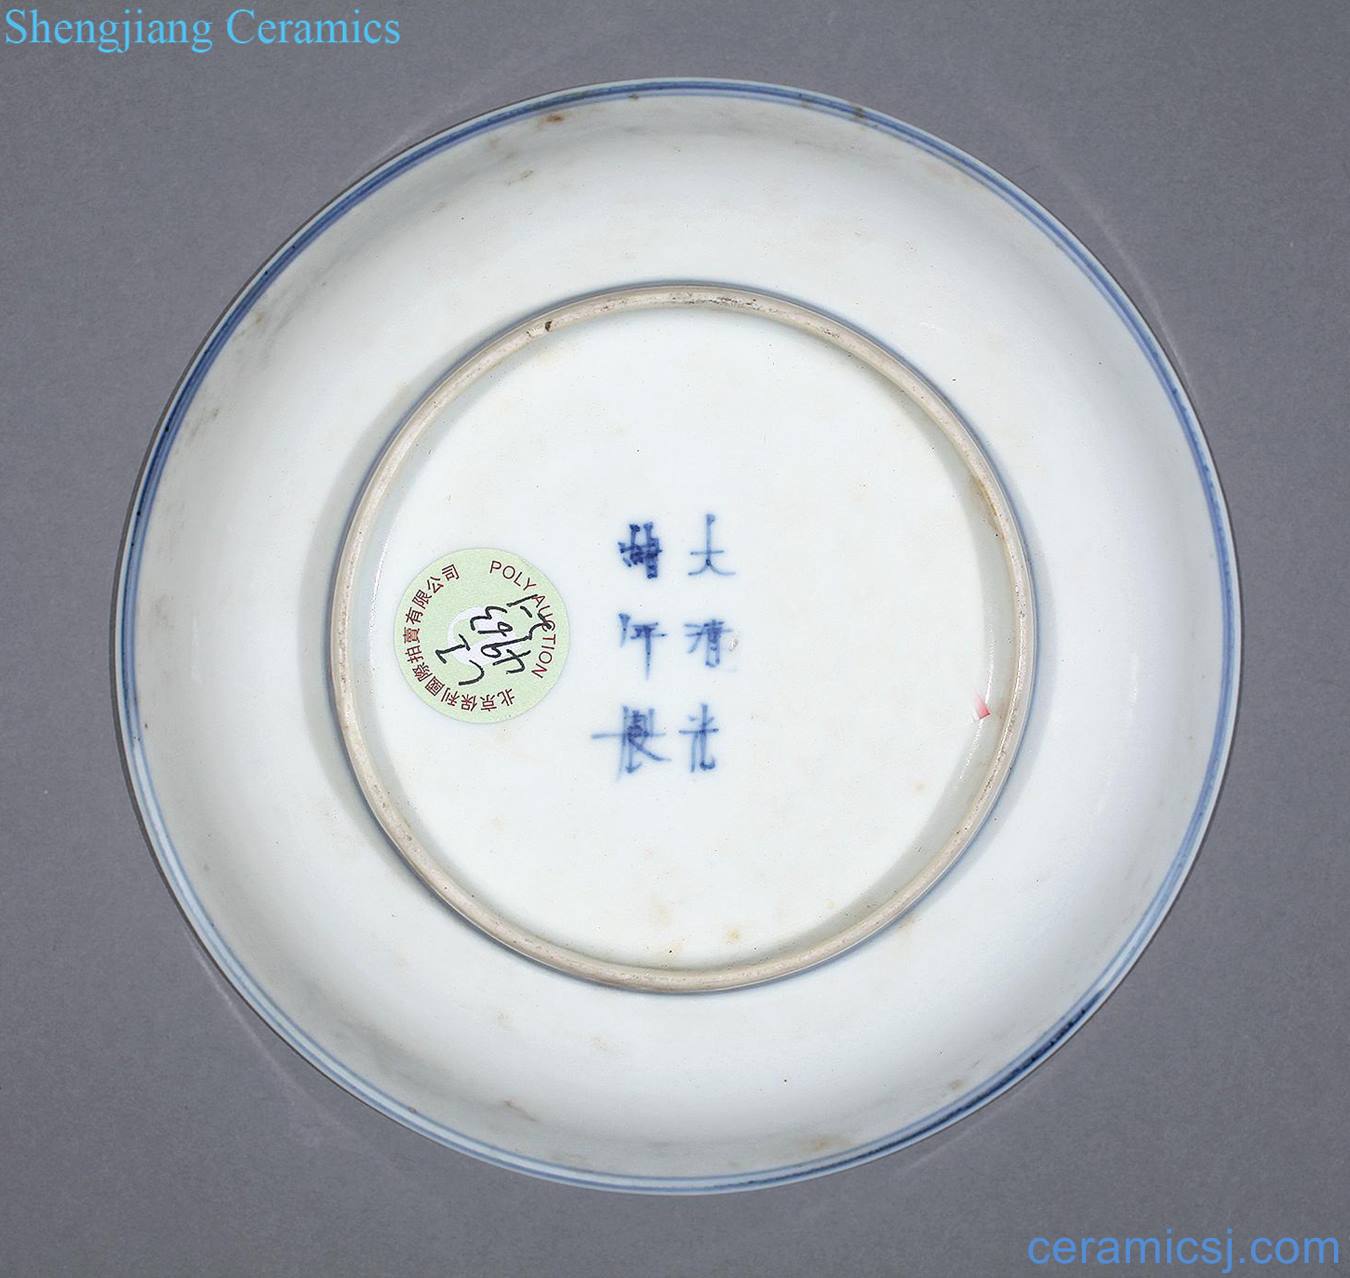 Qing guangxu Blue and white moire plate (a).